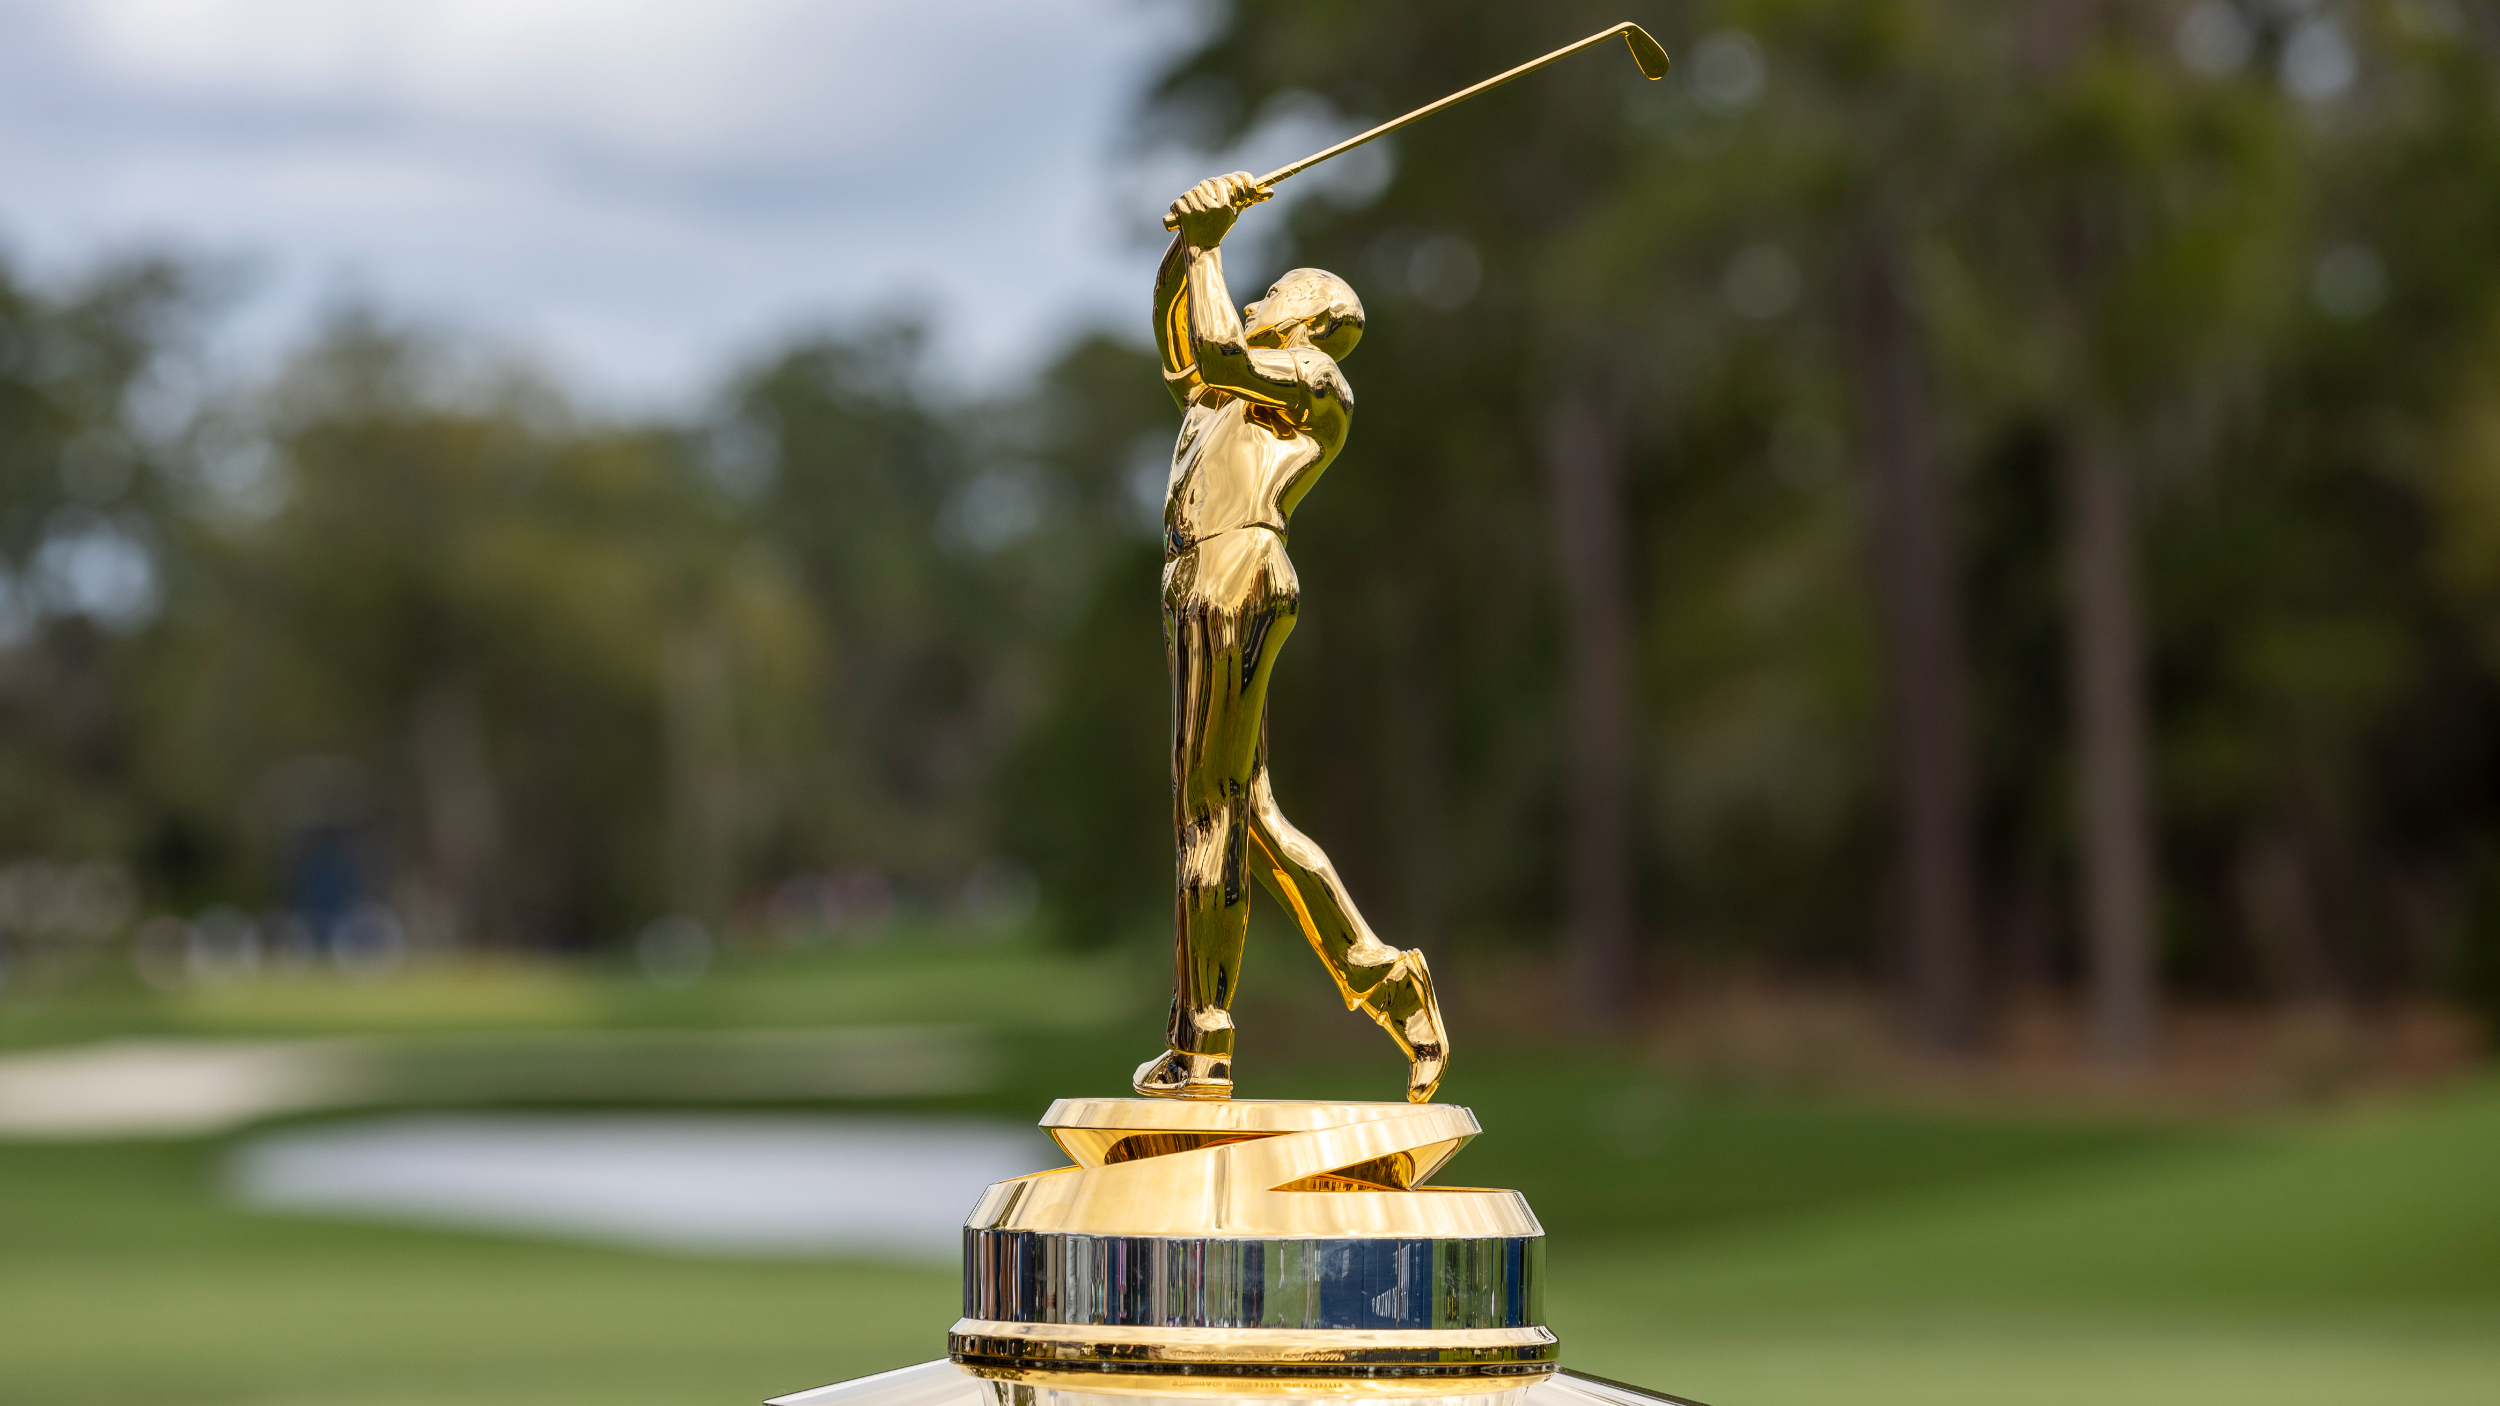 The 2022 Players Championship Caddie Payout, Purse, and Prize Money